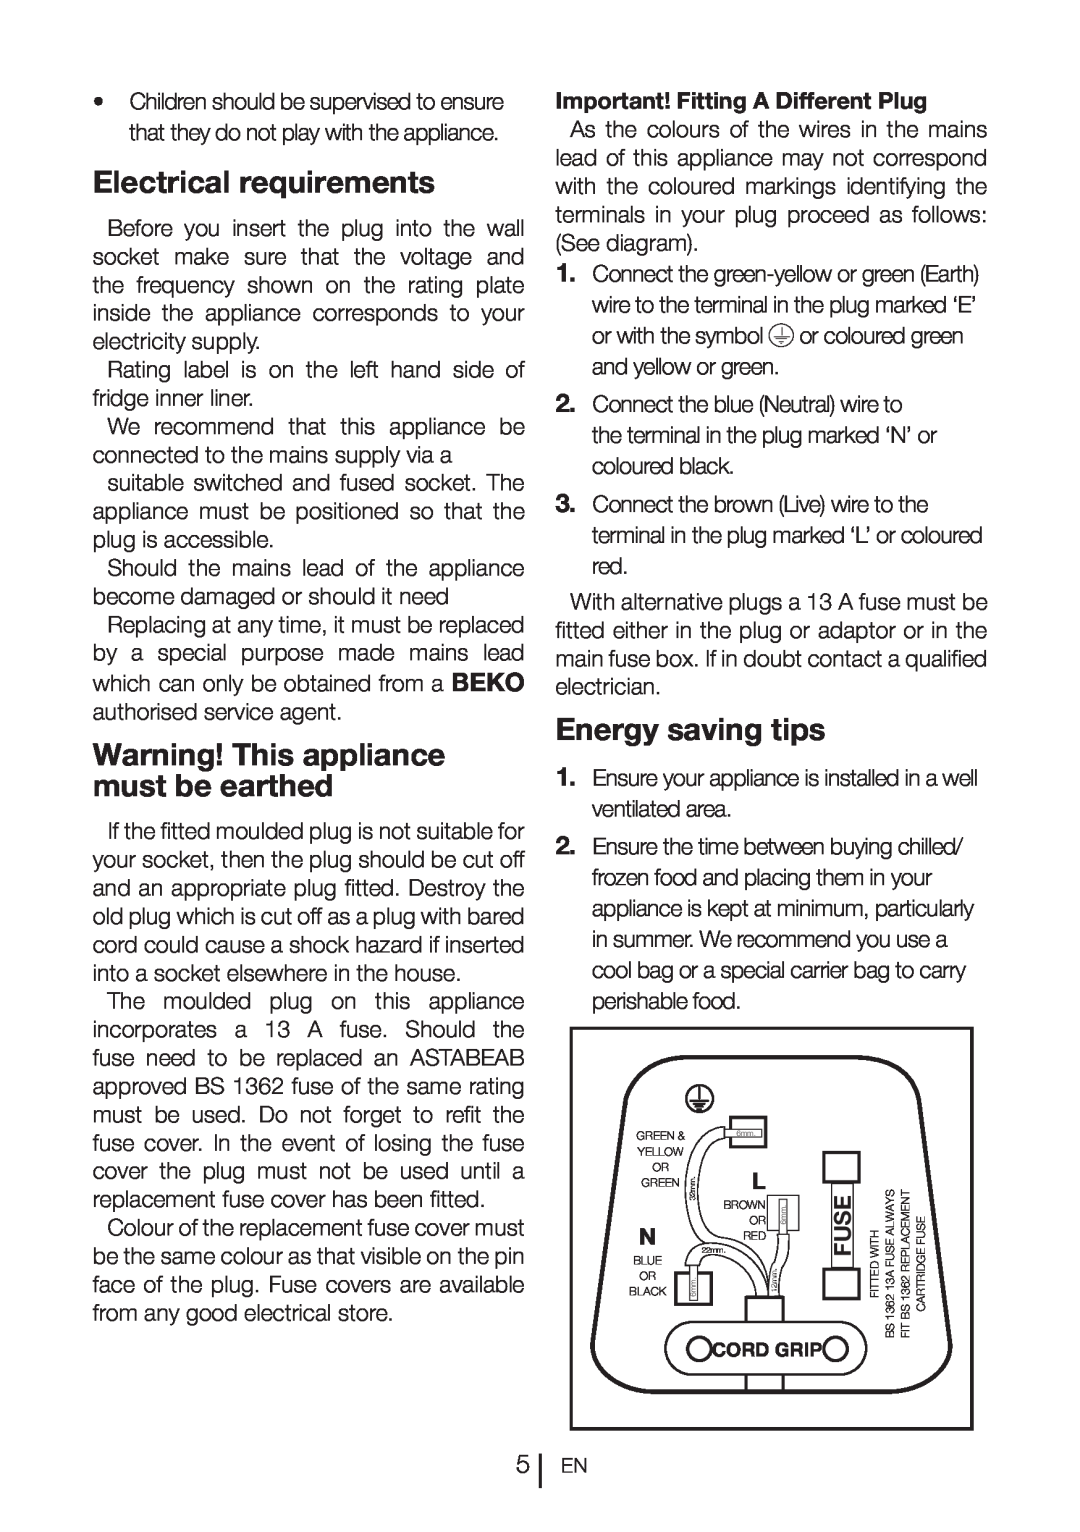 Beko CFMD7852X manual Electrical requirements, Warning! This appliance must be earthed, Energy saving tips, Fuse 